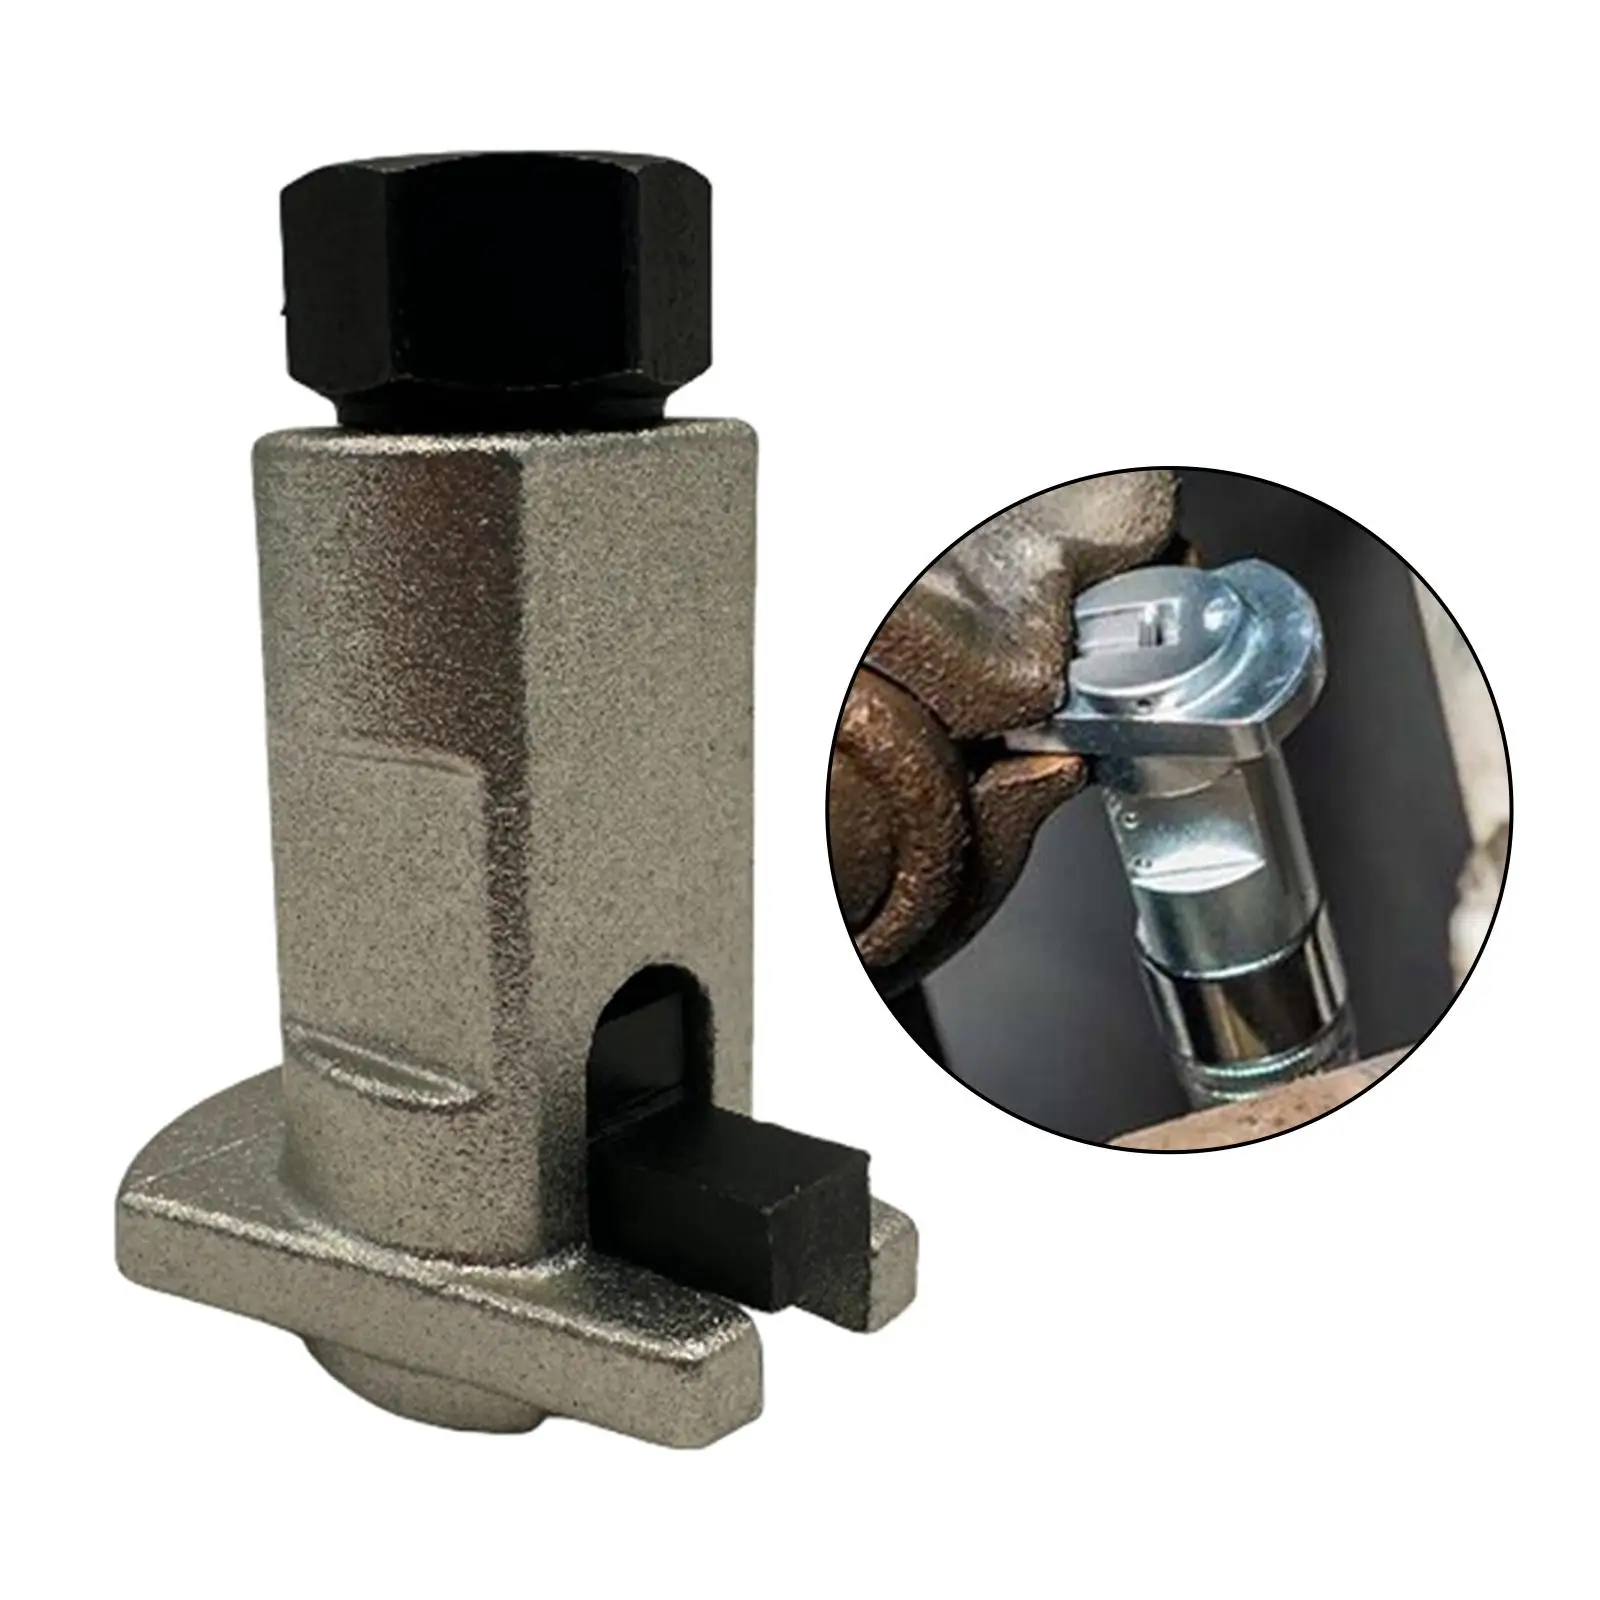 Hydraulic Shock Absorber Removal Tool Universal Durable High Hardness Strut Knuckles Remover Replaces Convenient Installation